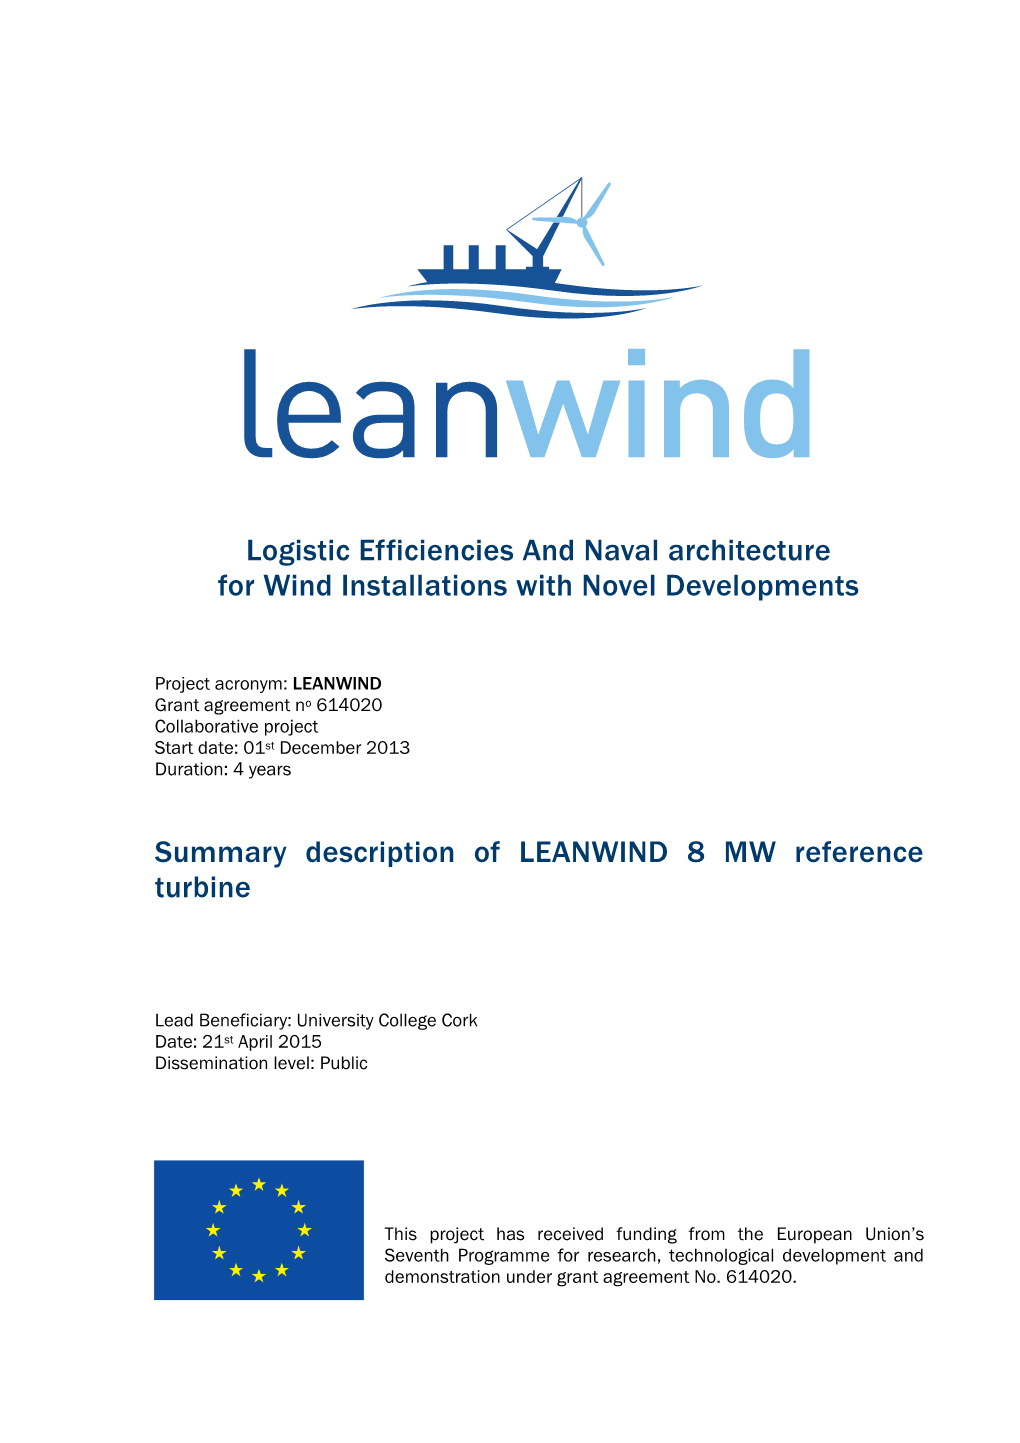 Logistic Efficiencies and Naval Architecture for Wind Installations with Novel Developments